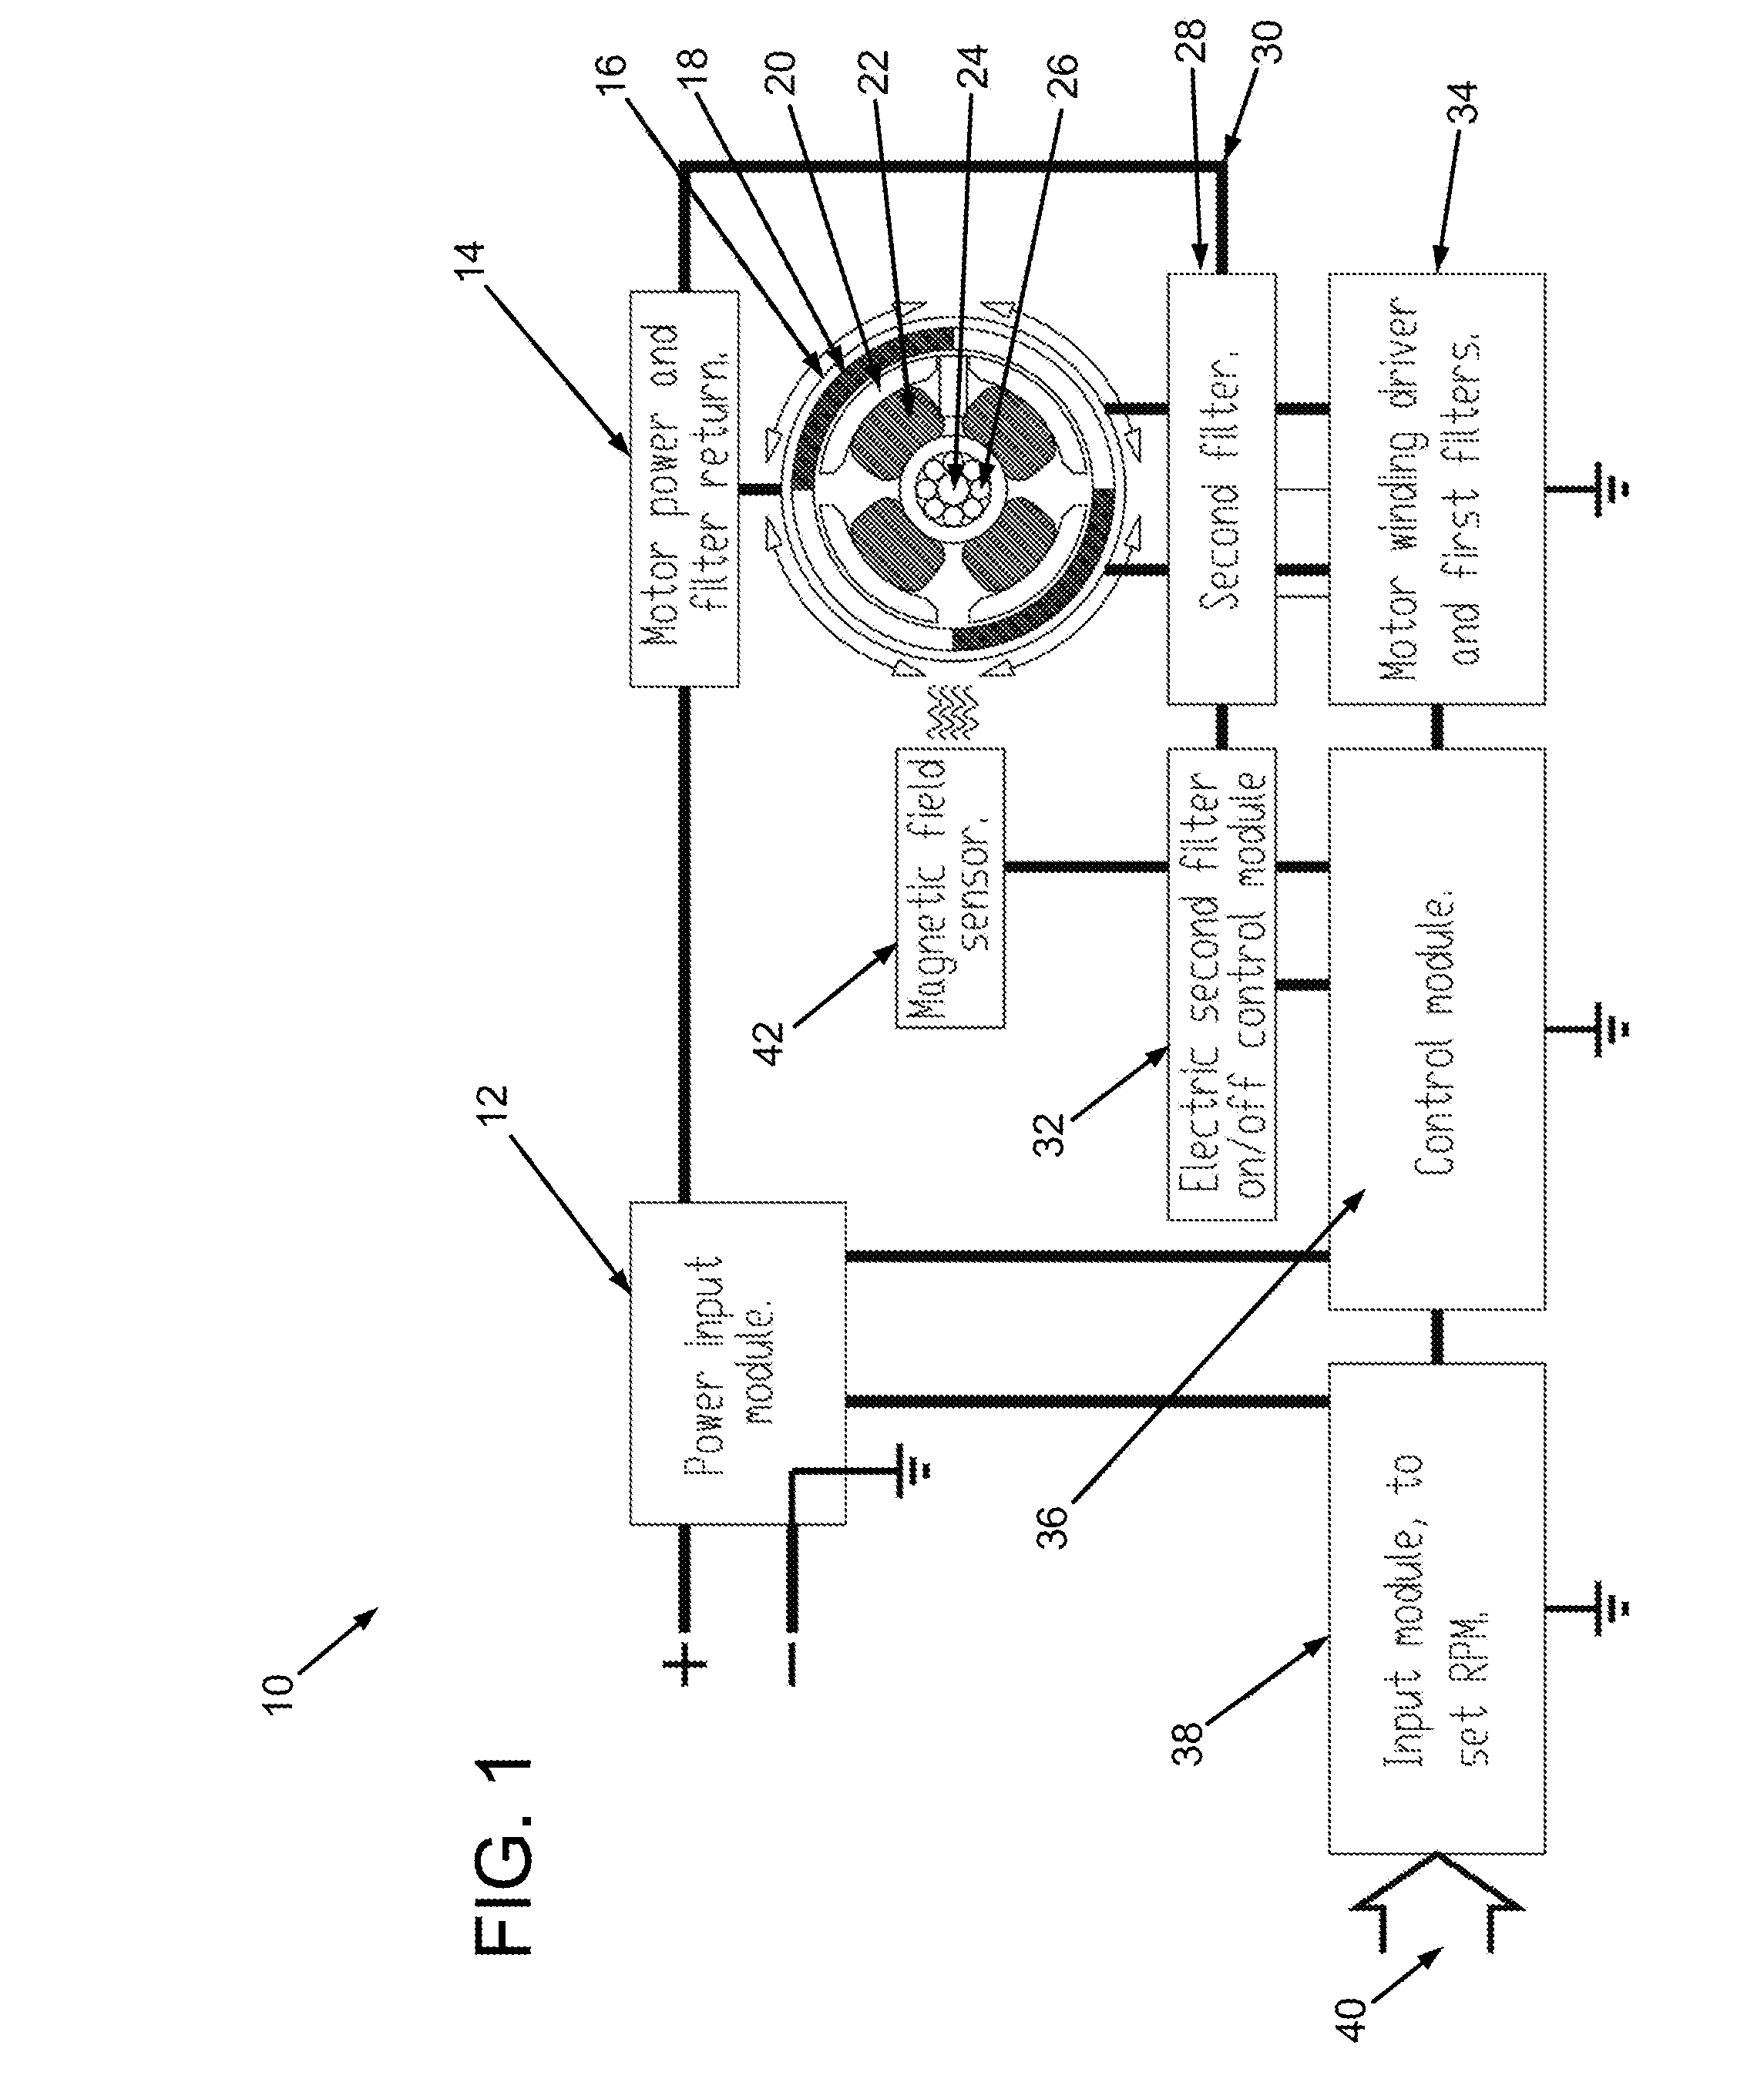 Method for making a motor quieter